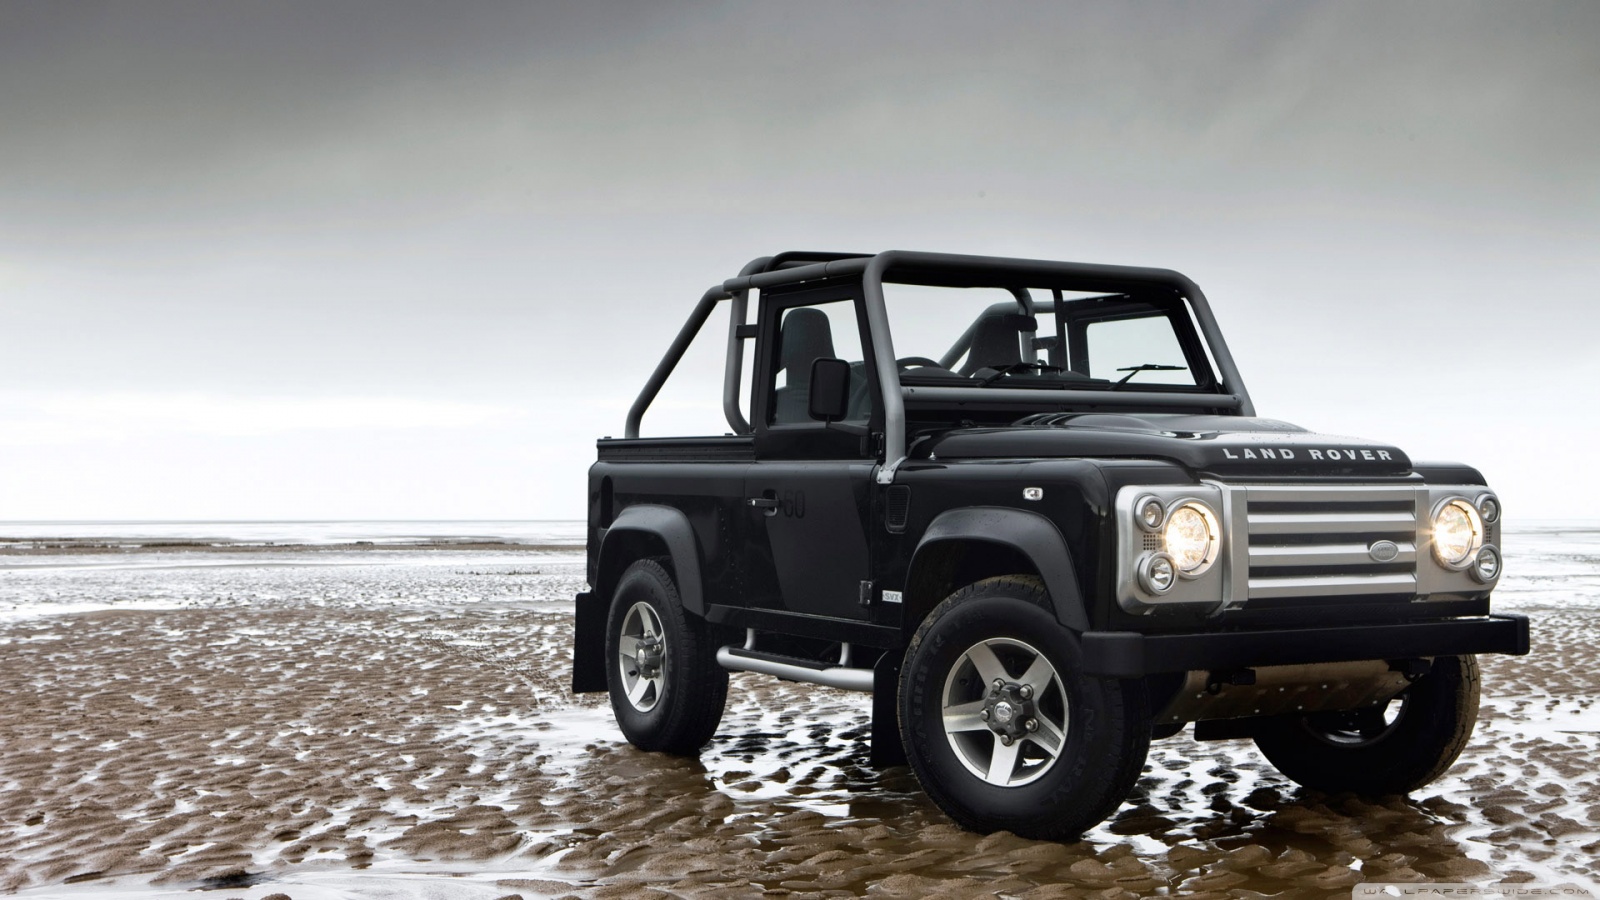 land rover, vehicles, land rover defender